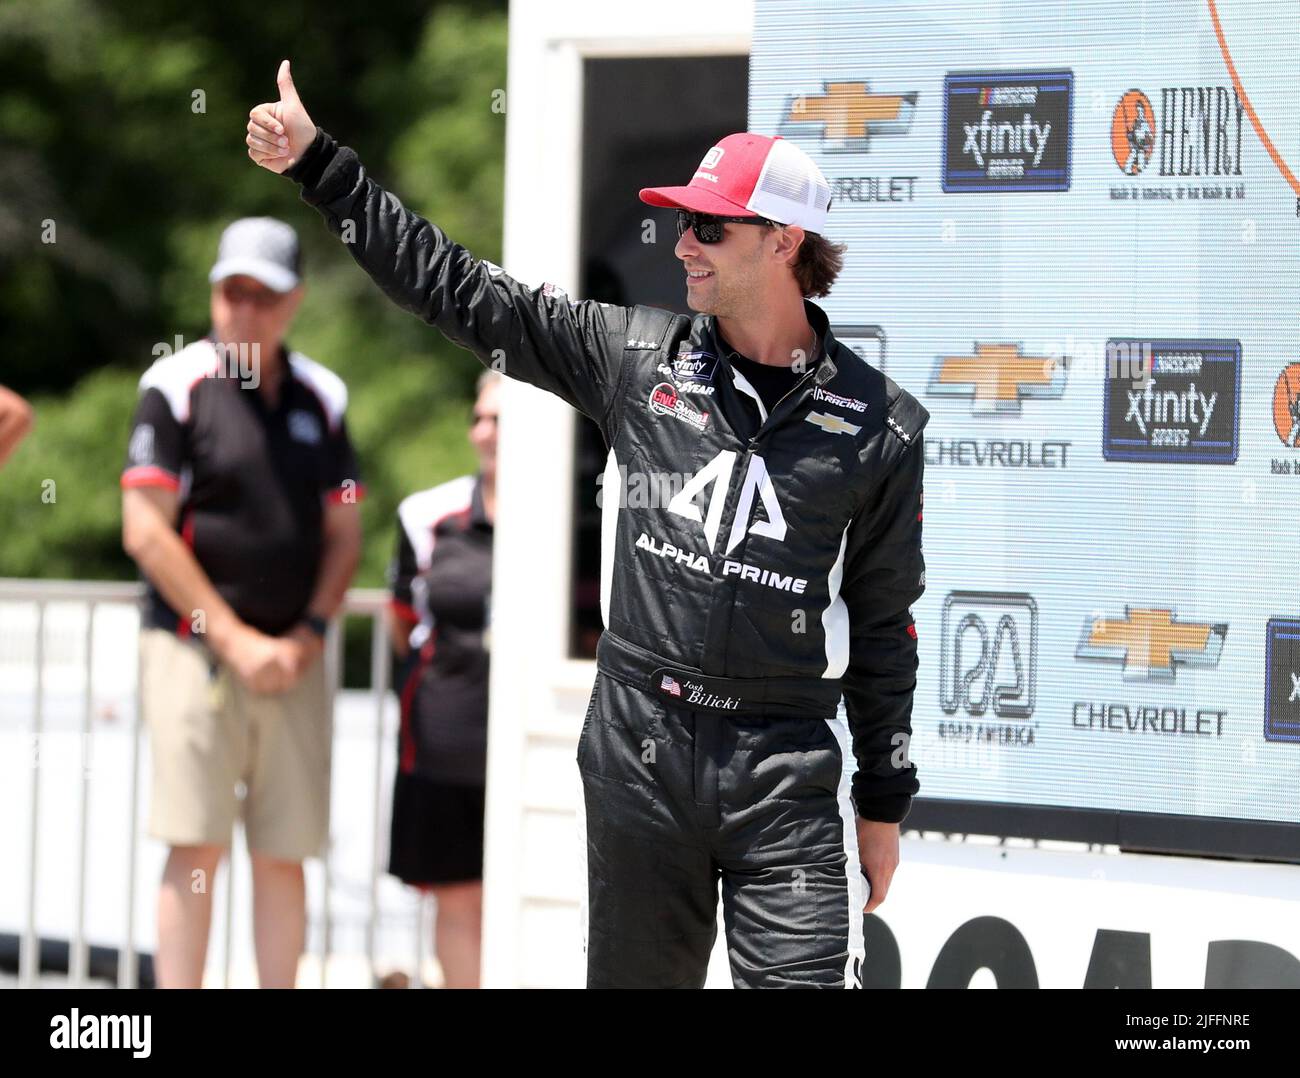 Plymouth, Wisconsin, USA. 2nd July, 2022. driver of the #44 Gravely Chevrolet, waves to the crowd before the NASCAR Xfinity Series Henry 180 at Road America on July 02, 2022 in Plymouth, Wisconsin. Ricky Bassman/Cal Sport Media/Alamy Live News Stock Photo